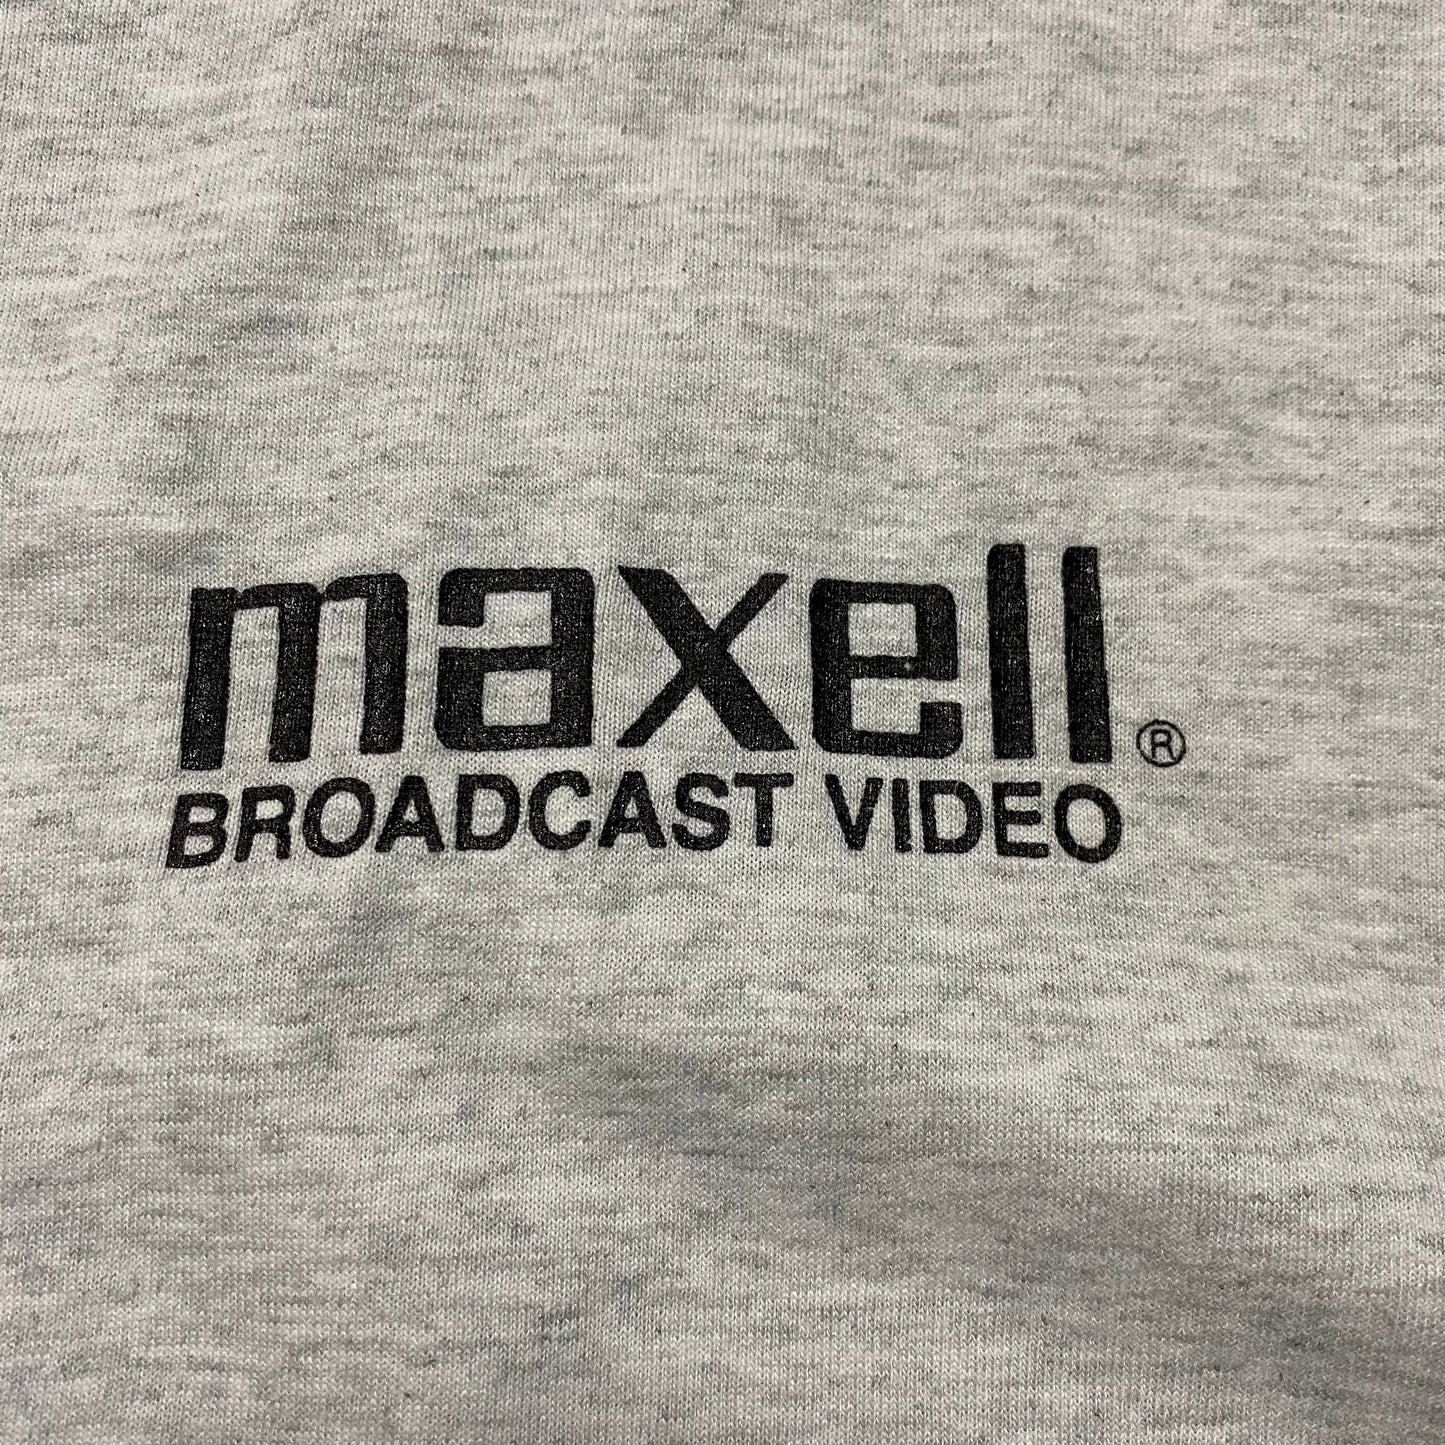 90's maxell "BROADCAST VIDEO" AD T-SHIRT